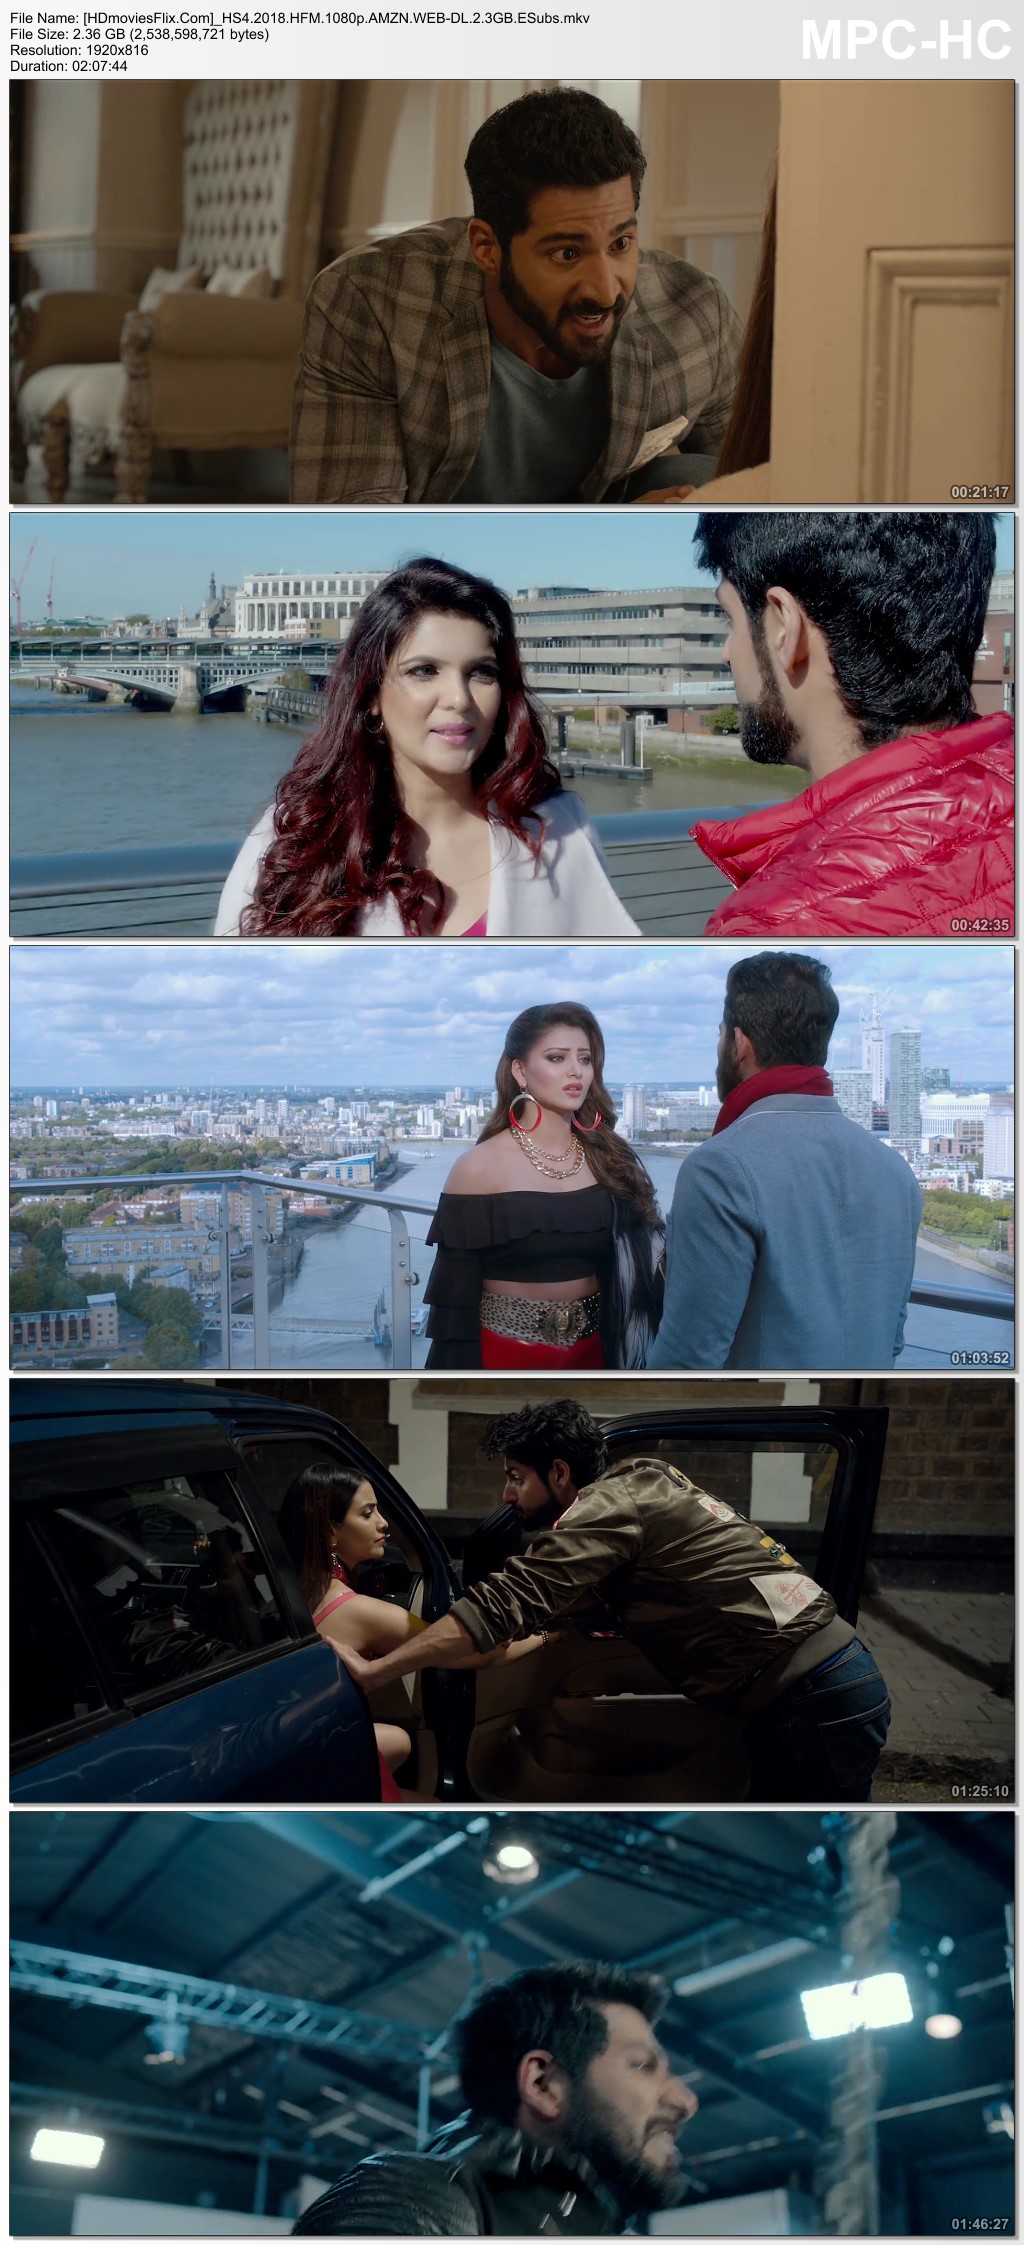 Hate Story IV (2018)